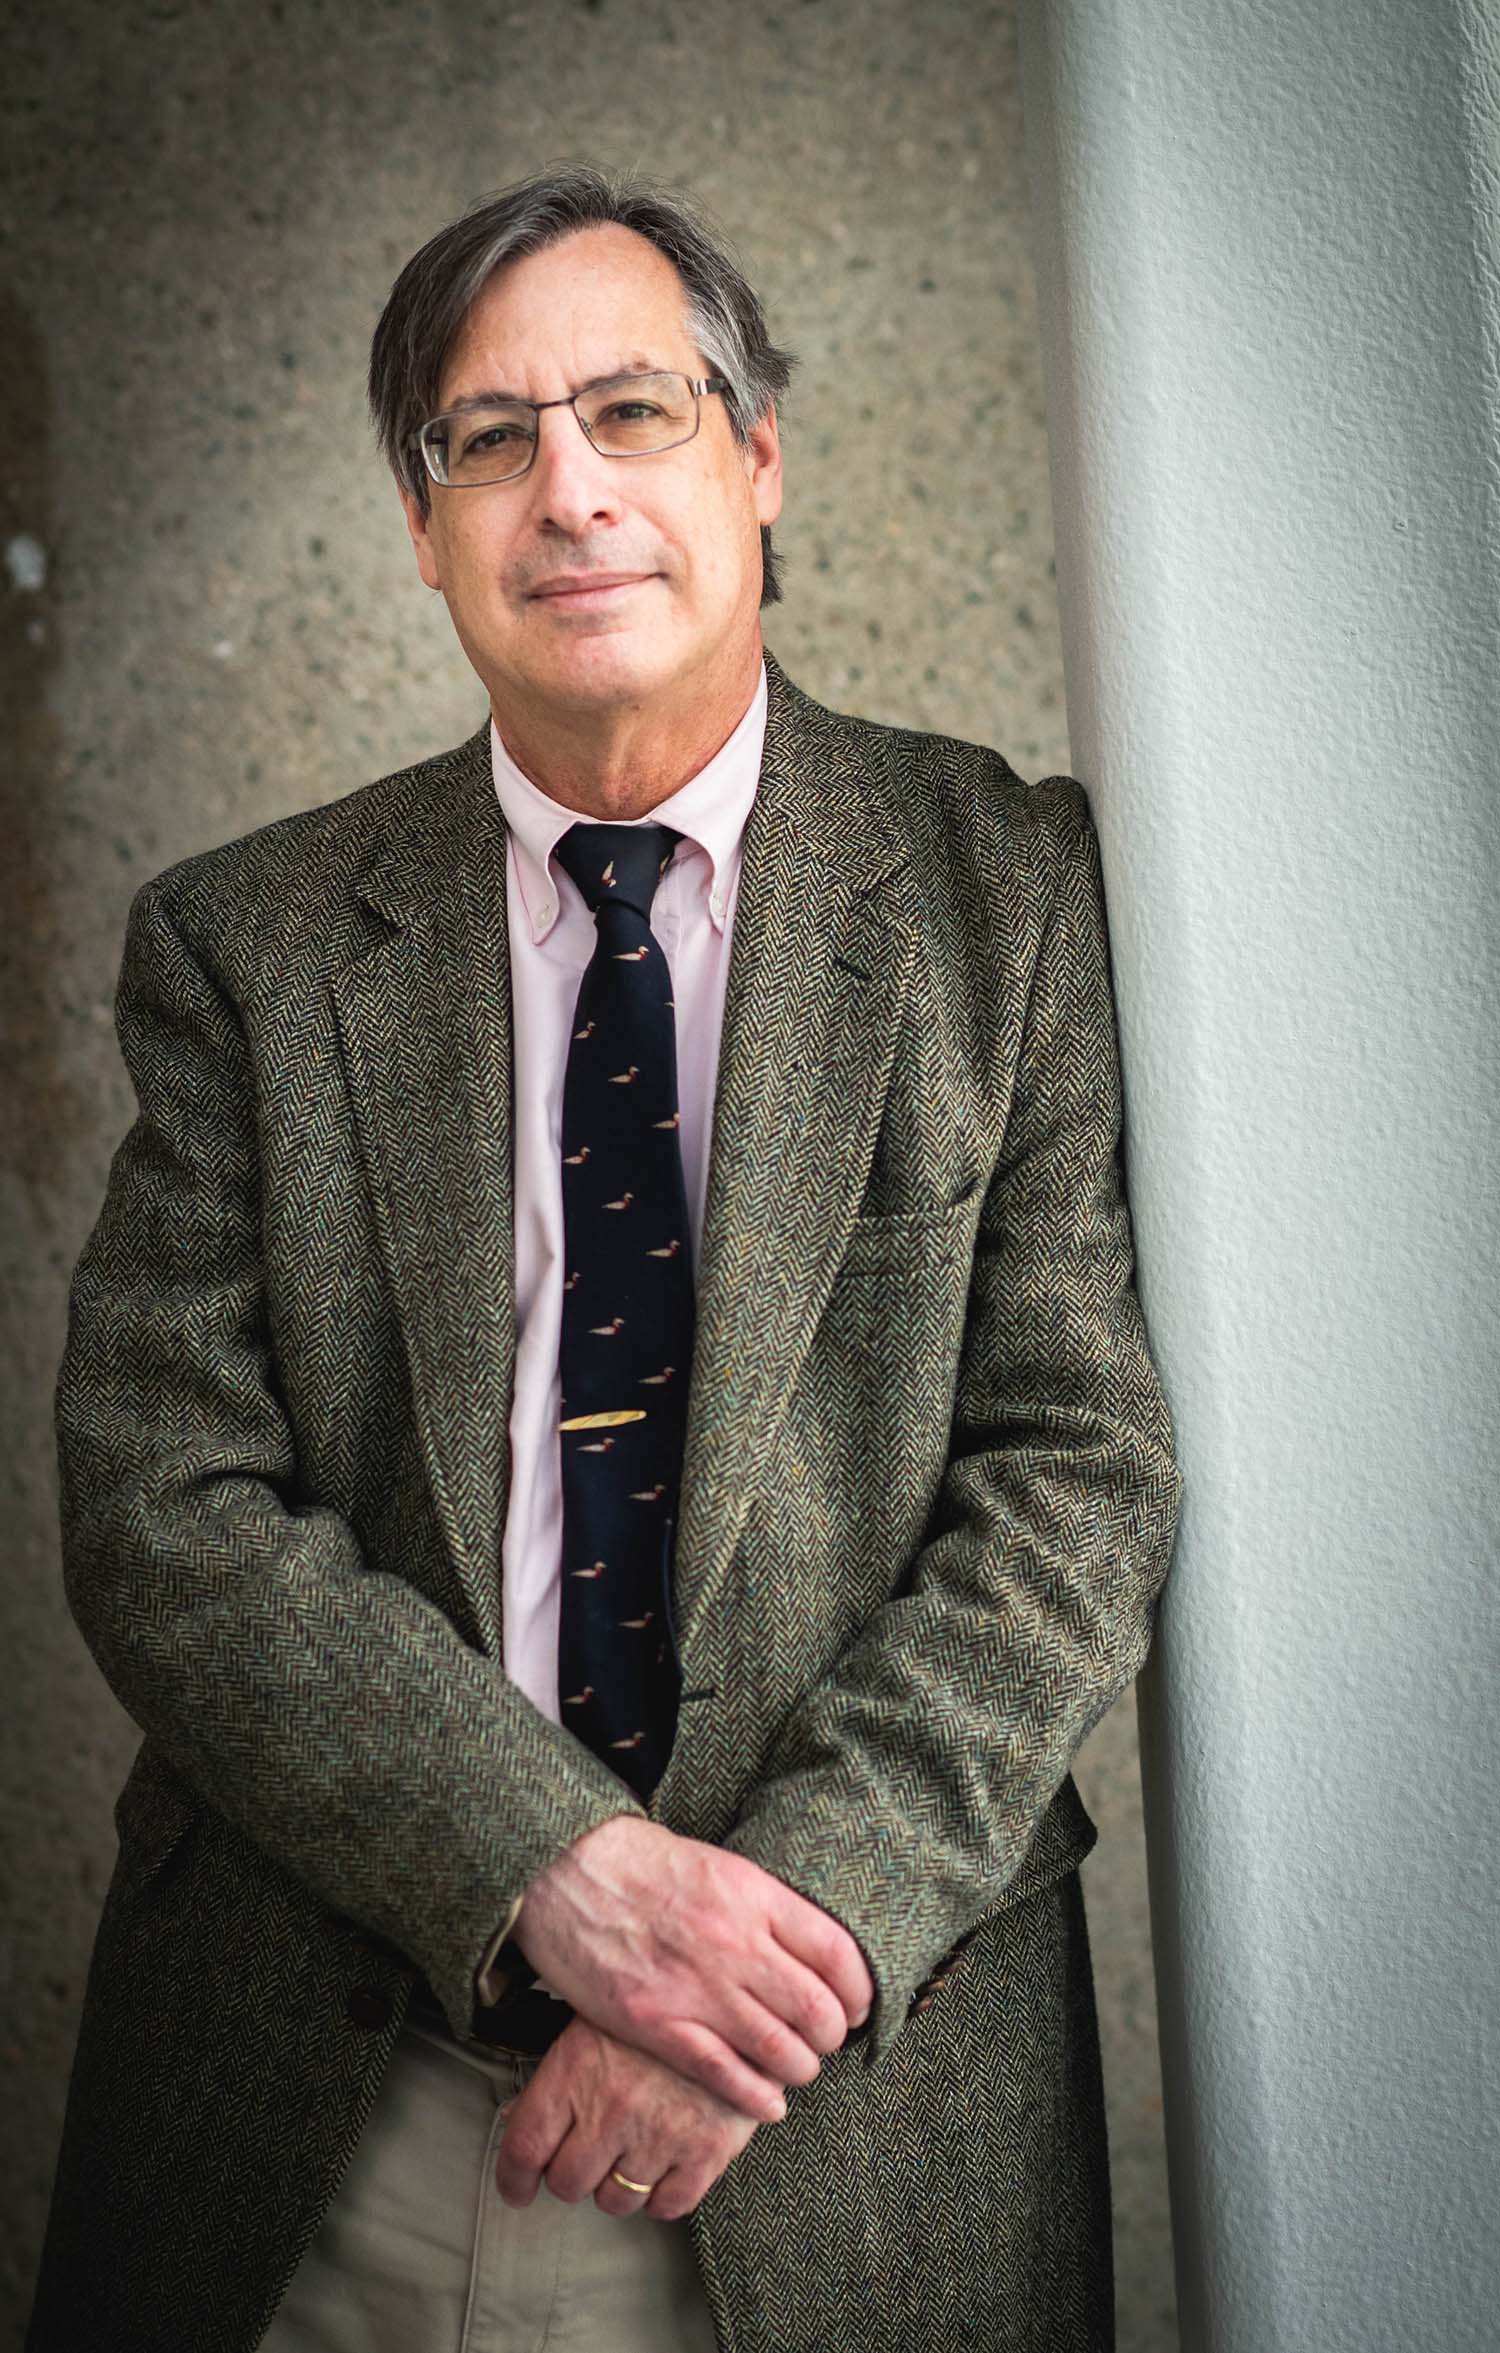 Photo of Gary Lawson, School of Law professor of Law. He is a middle-aged white man with glasses and salt and pepper hair. He wears a speckled gray-green tweed suit, pink button down and black tie. He smiles slightly and holds his arm with his hand and learns against a white wall.